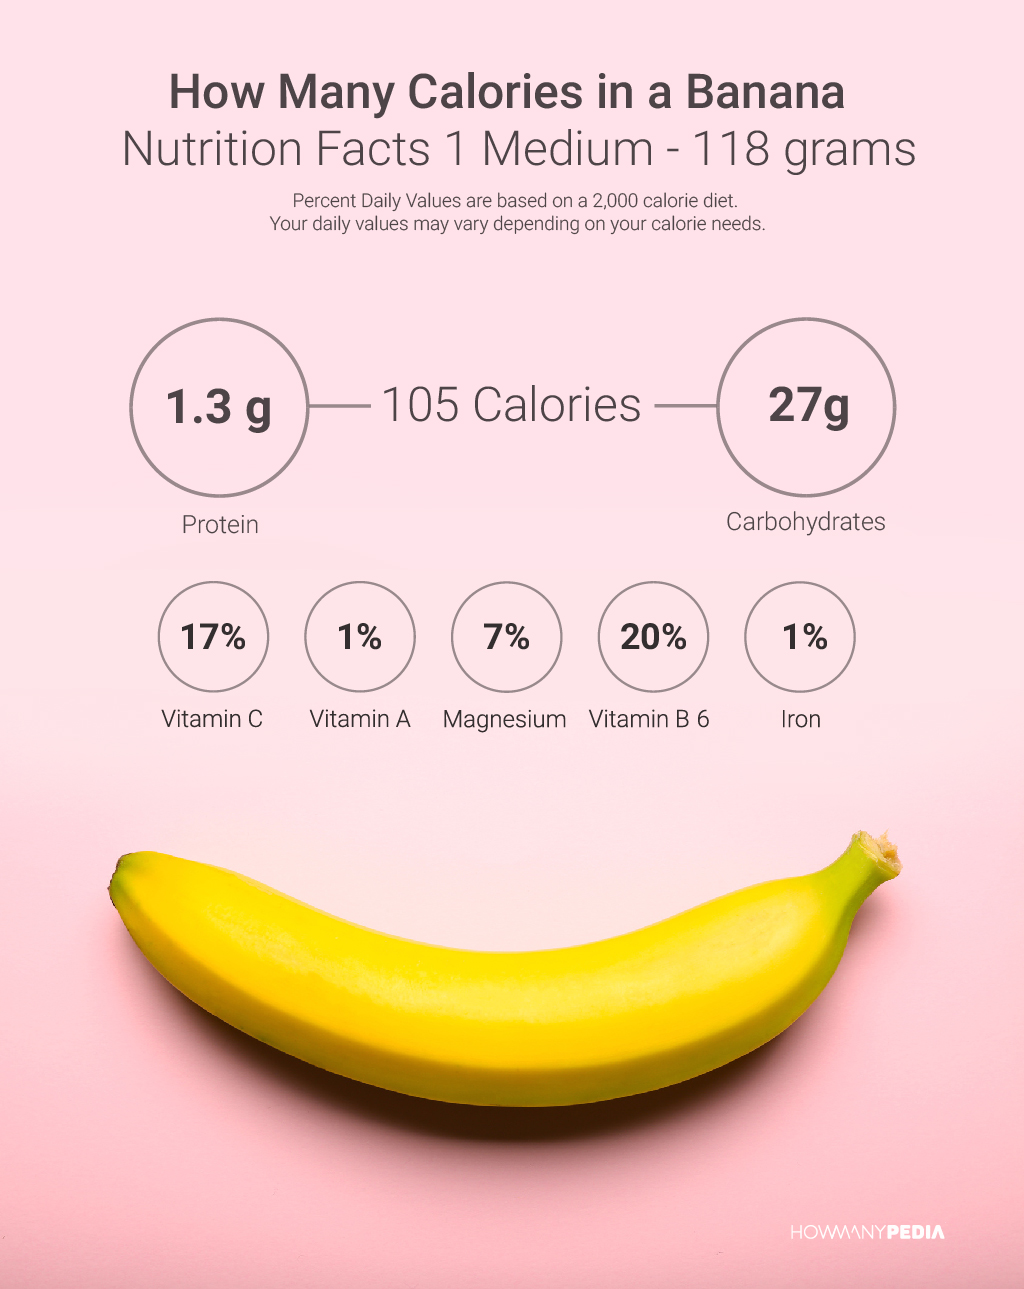 How Many Calories in a Banana Nutrition Facts